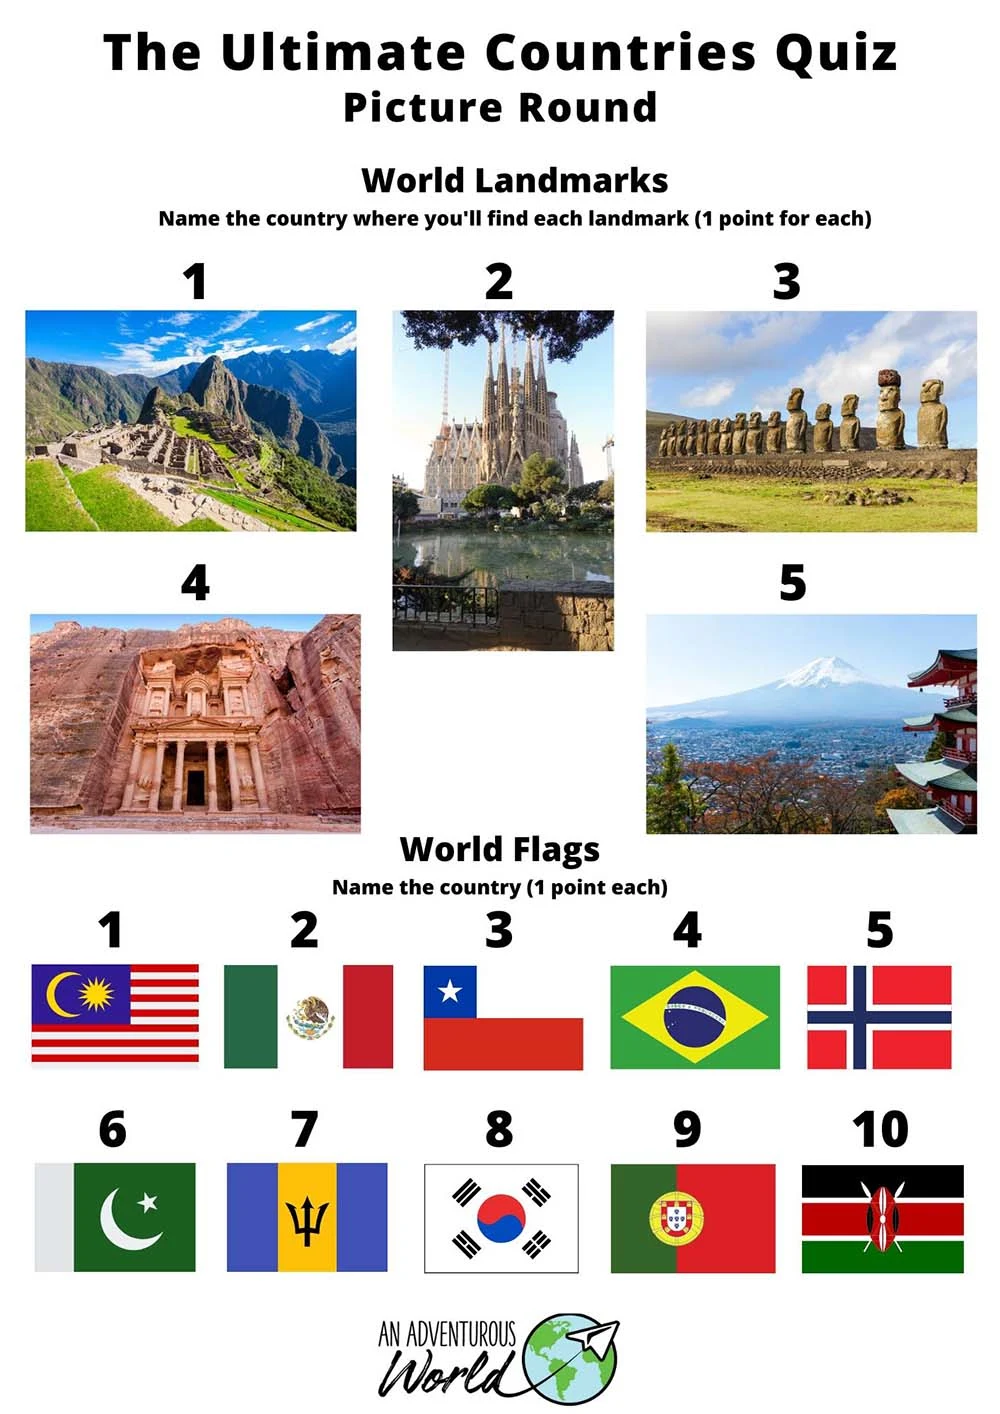 The Ultimate Countries Quiz Questions and Answers Quiz)